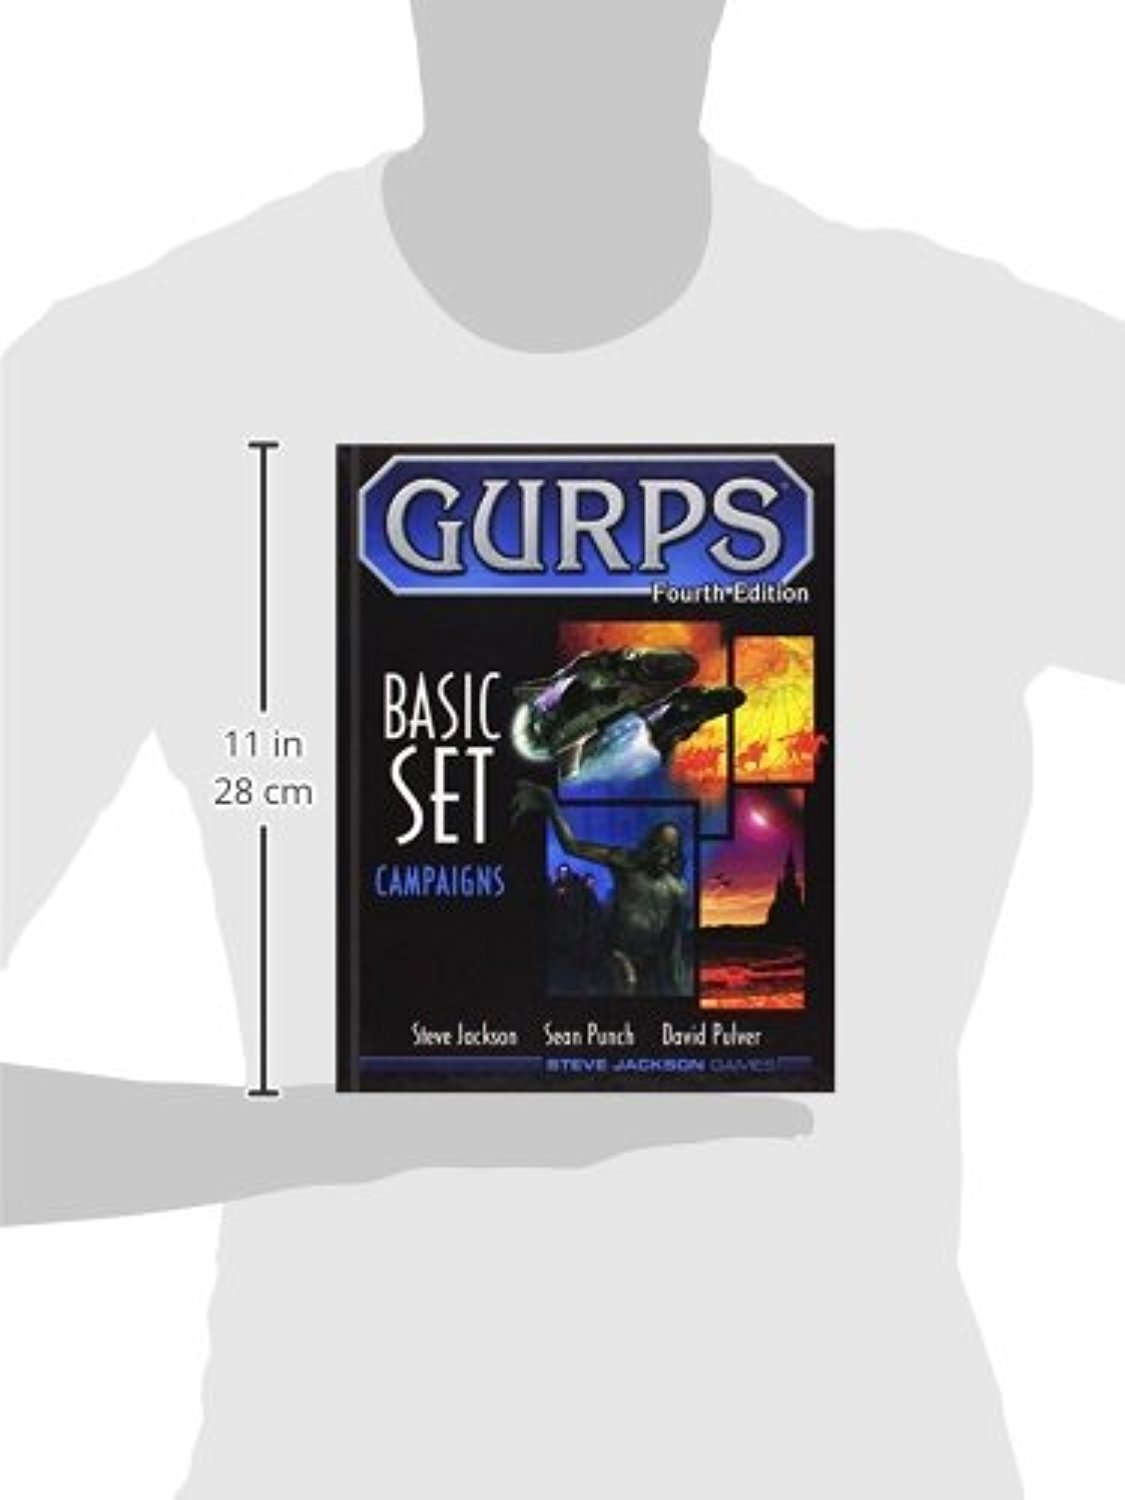 GURPS BASIC SET Campaigns (GURPS: Generic Universal Role Playing System) by Steve Jackson - image 3 of 4